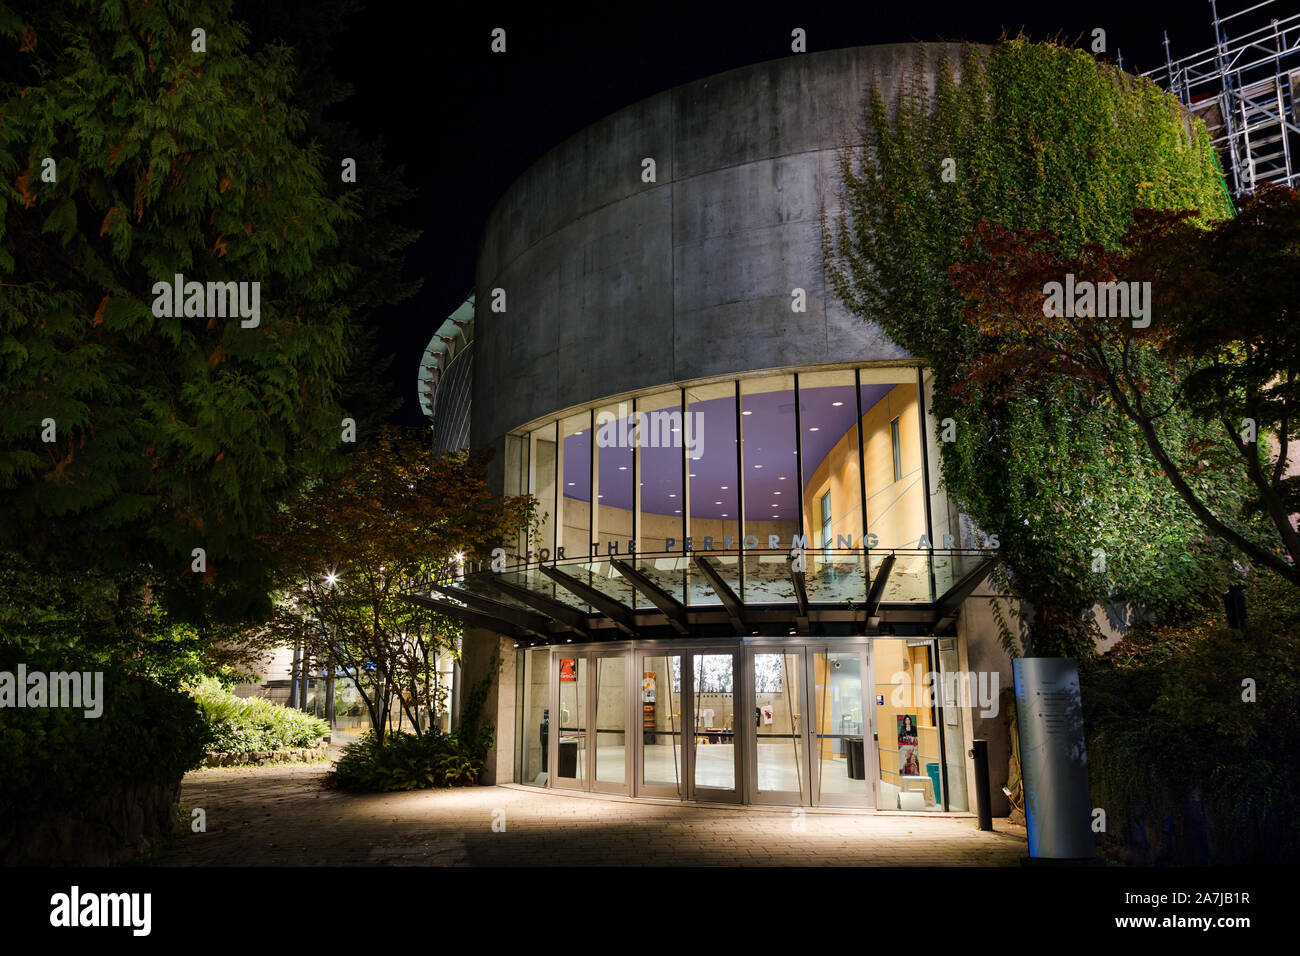 VANCOUVER, BC, CANADA - OCT 05, 2019: The Chan Center for the Performing Arts at the University of British Columbia. Stock Photo